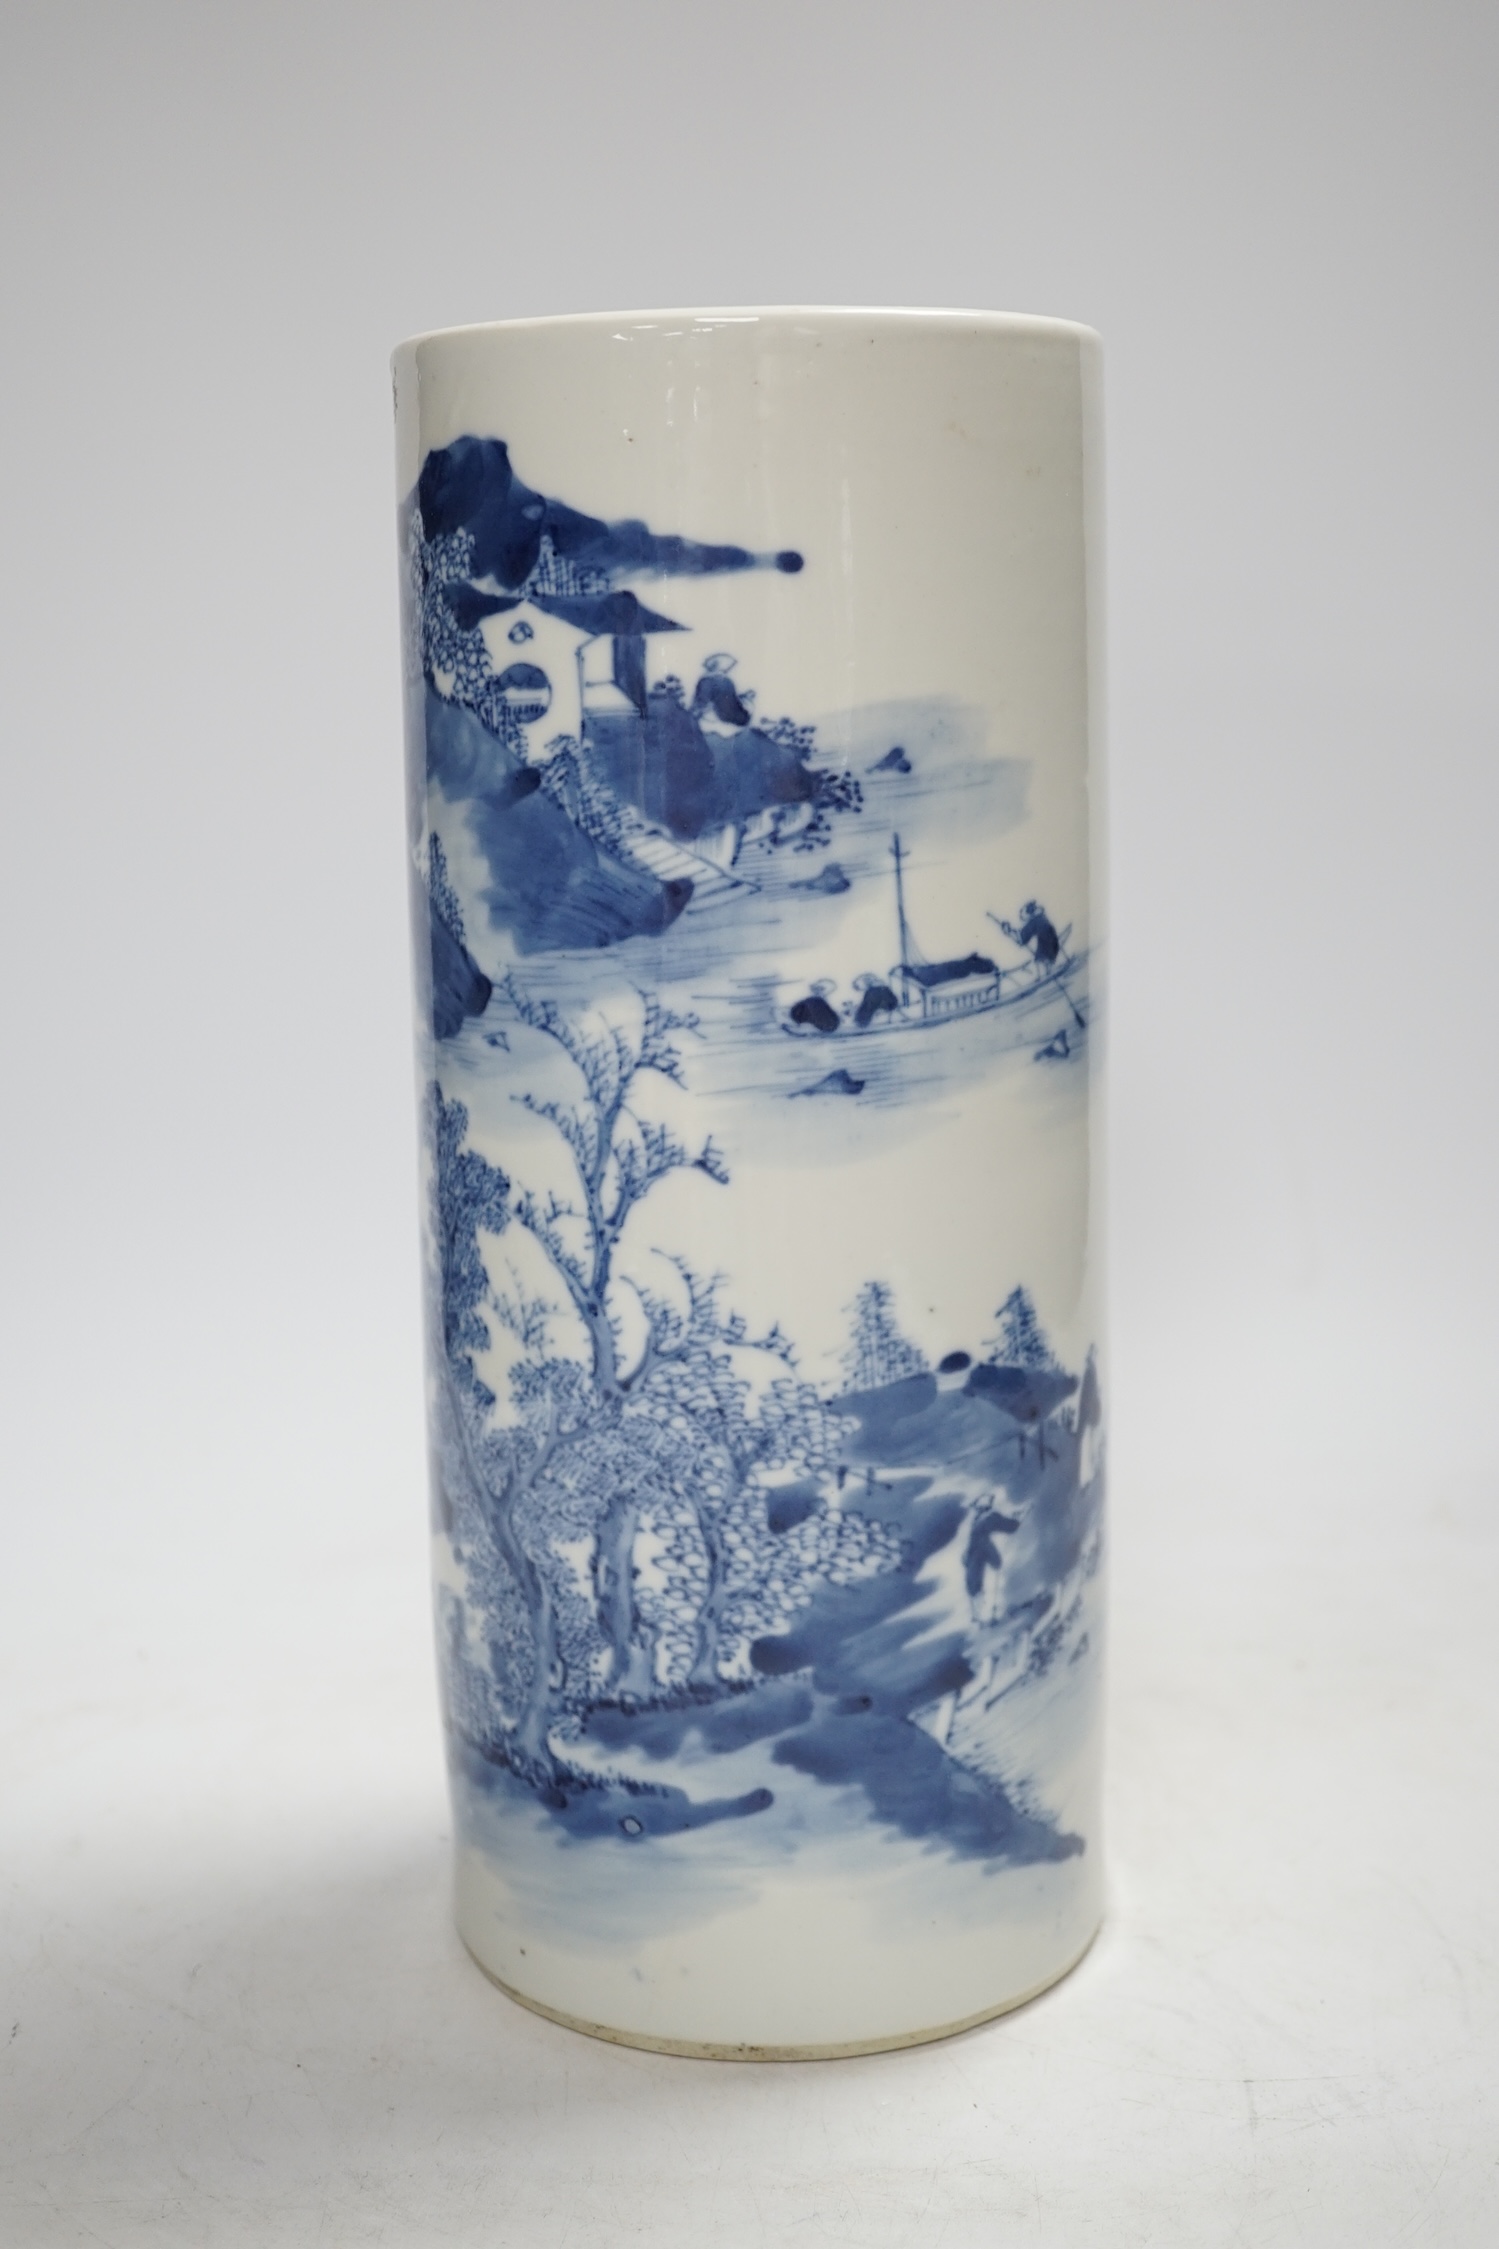 A 19th century Chinese blue and white cylindrical brushpot or sleeve vase, 28.5cm high